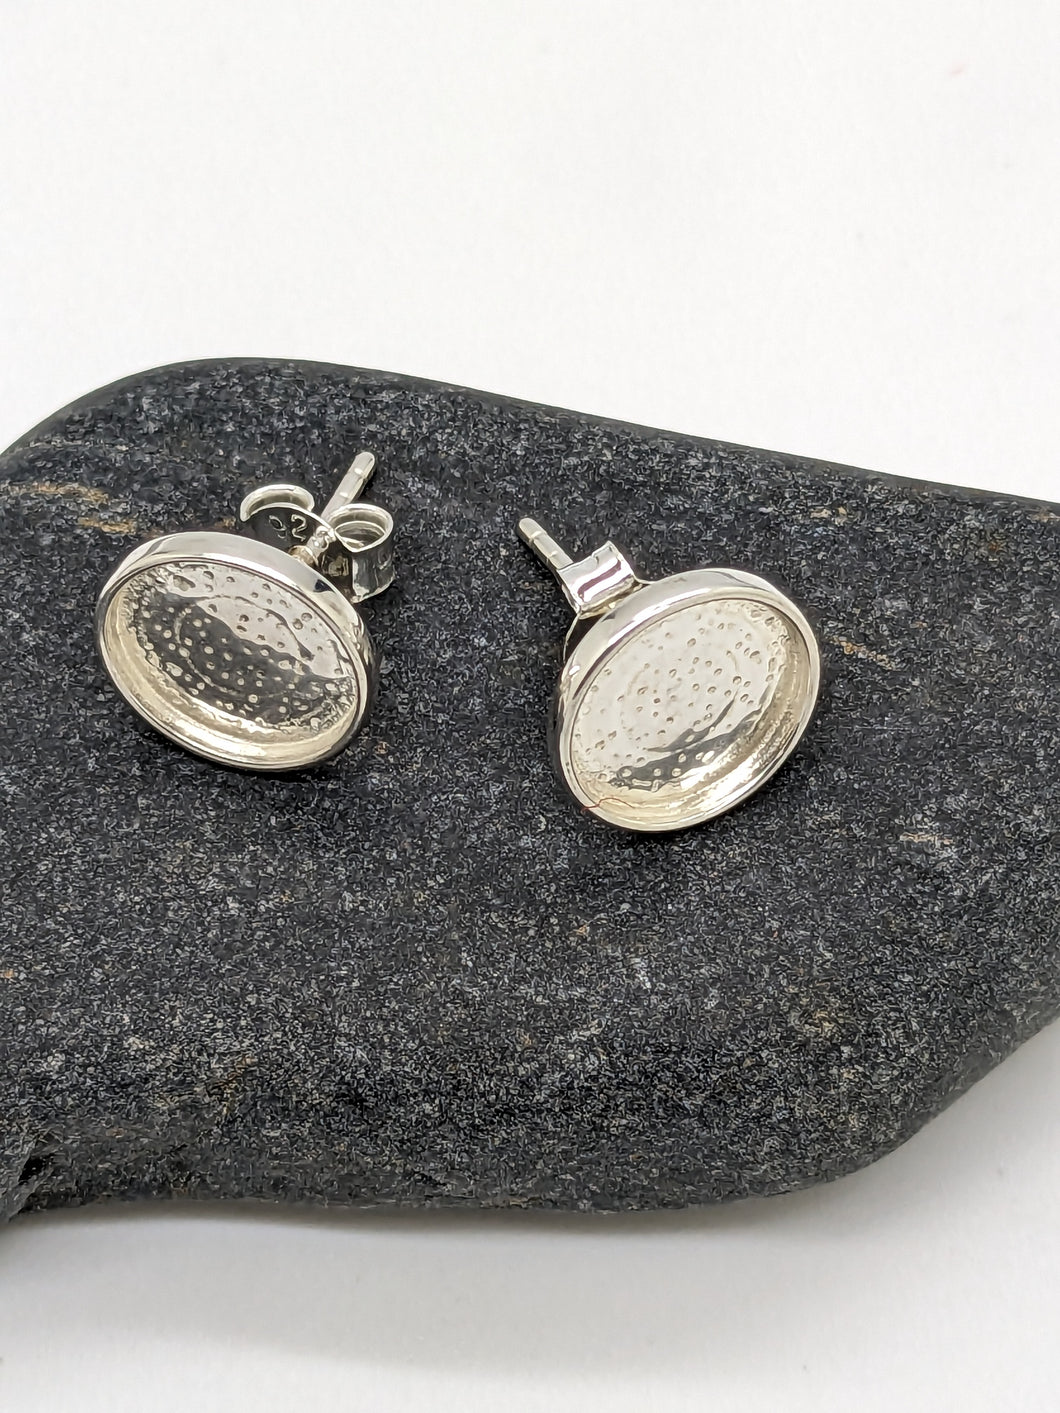 10mm round sterling silver studs with bezel